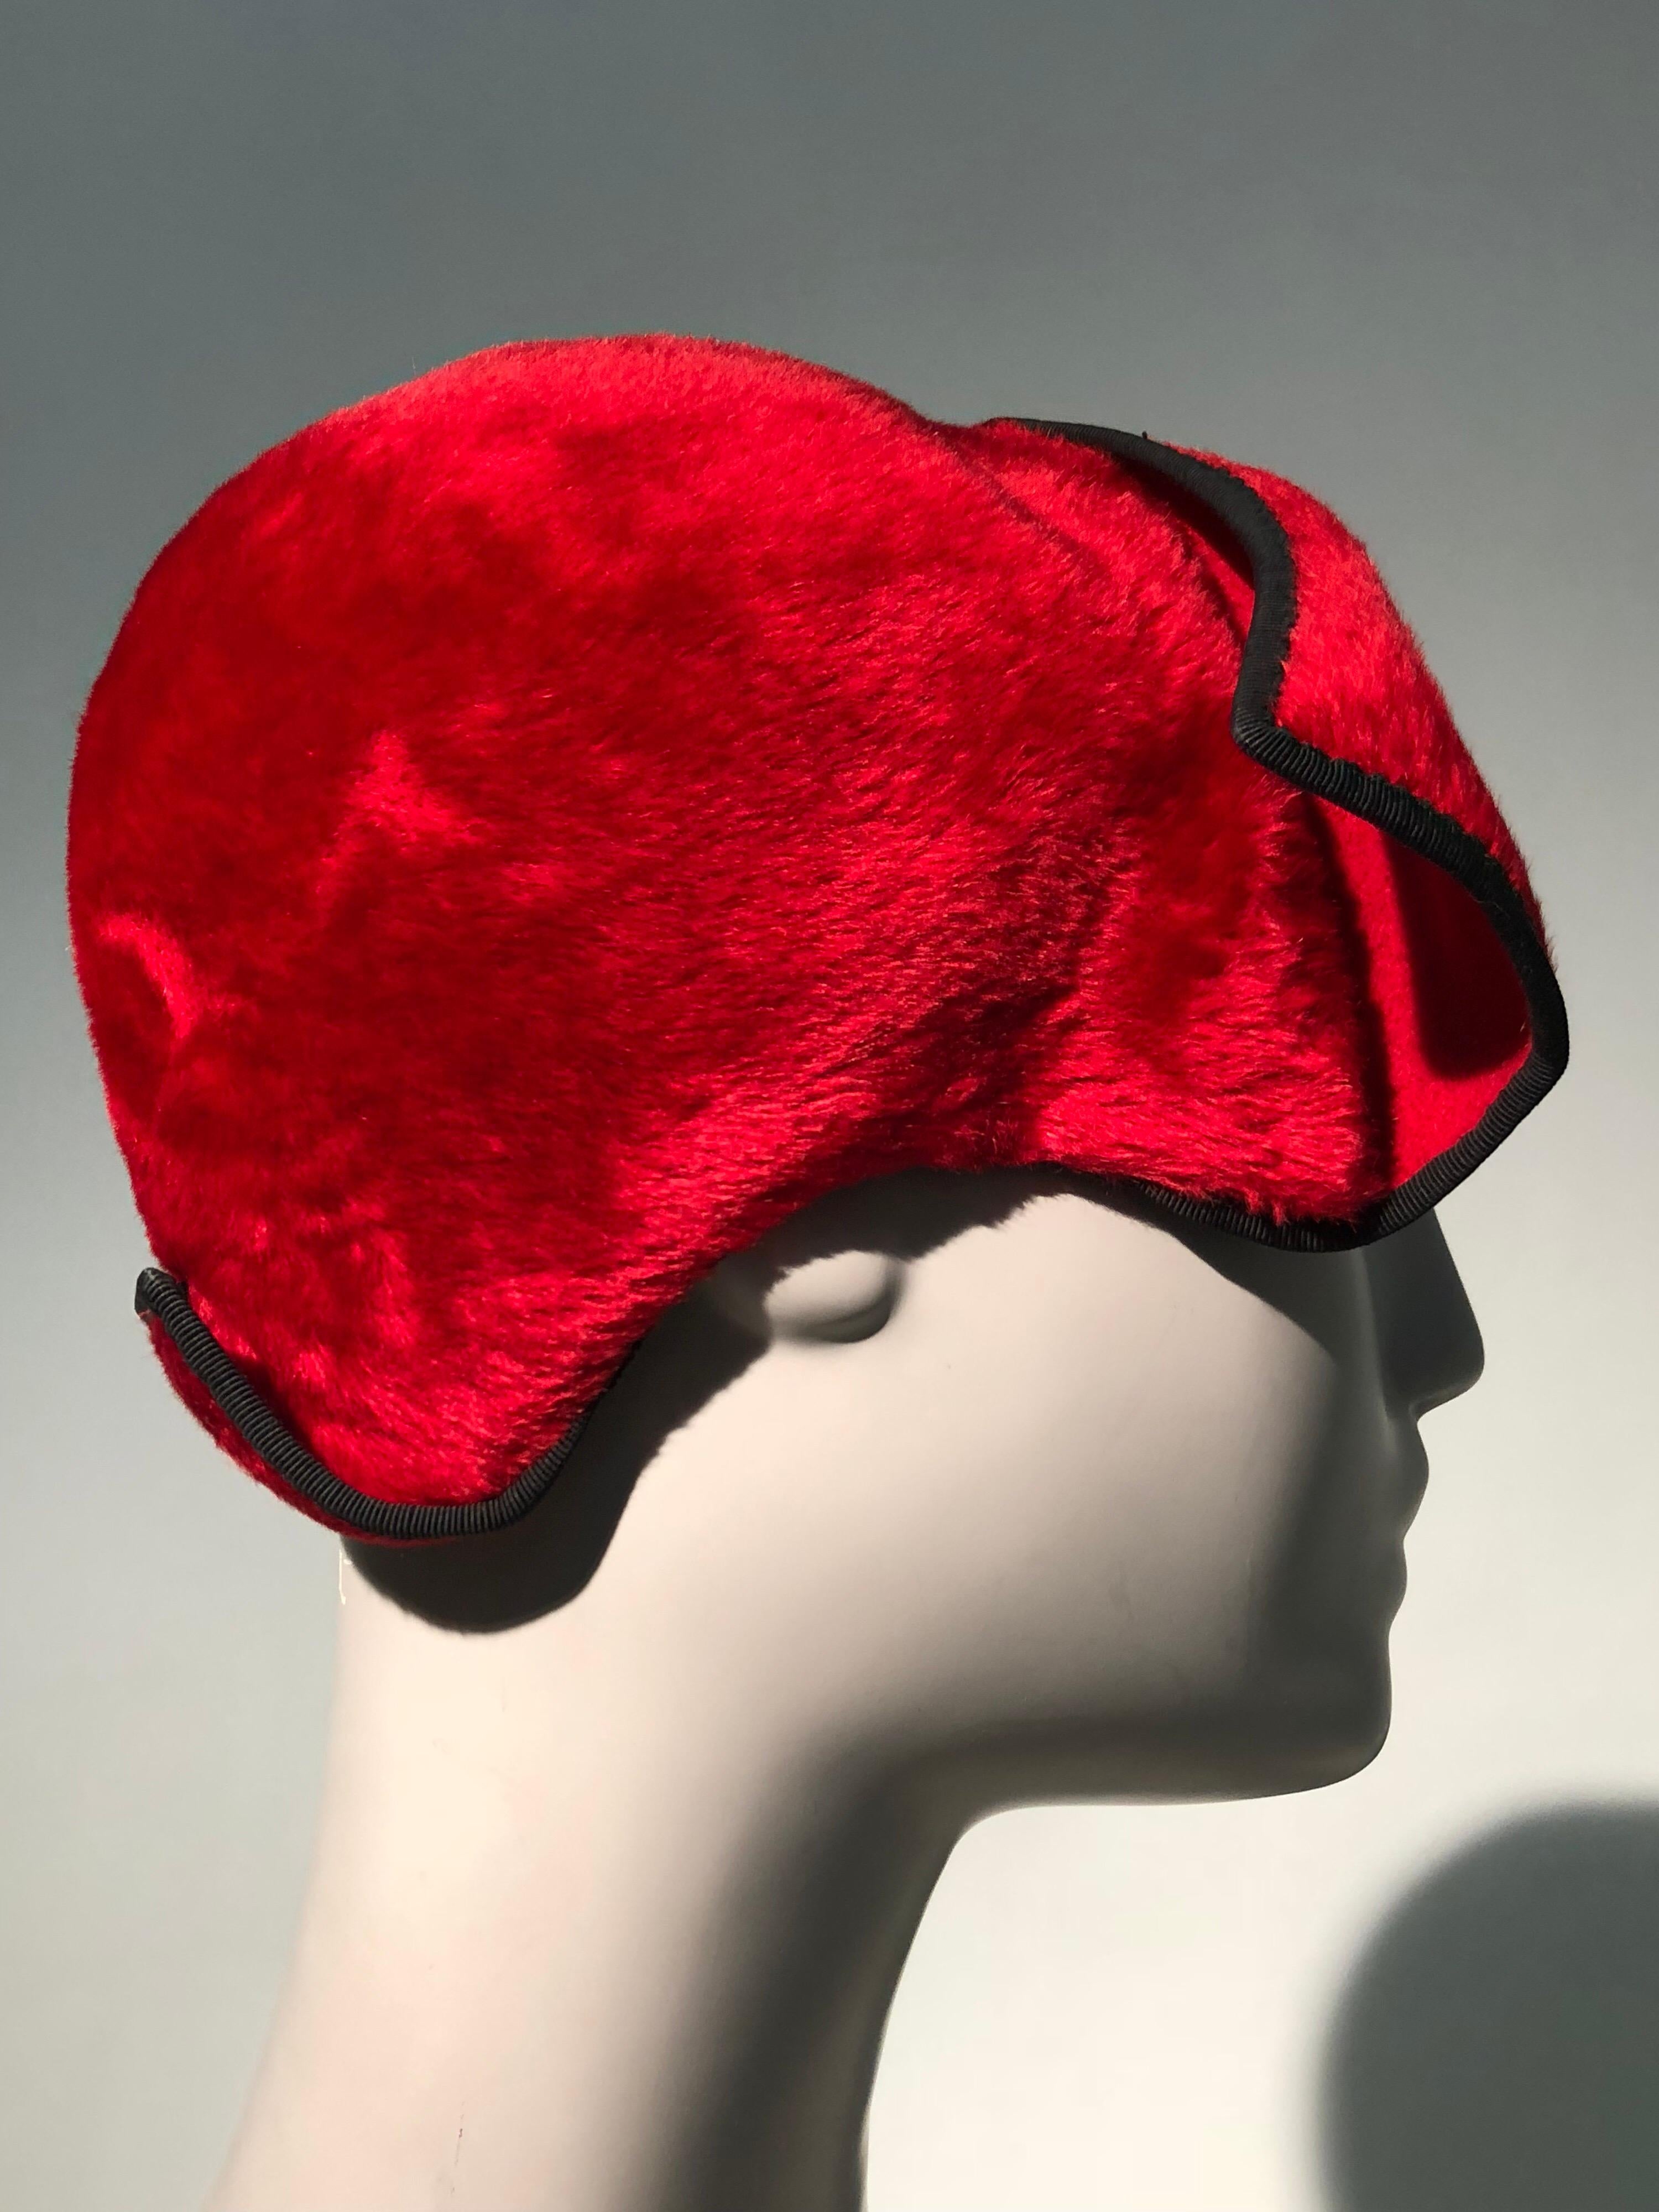 An unusual 1950s John Frederics red fur felt close-fitting cloche cap with black  binding at edges and turned back corners cut into the form at front and back.  Size Small to Medium.